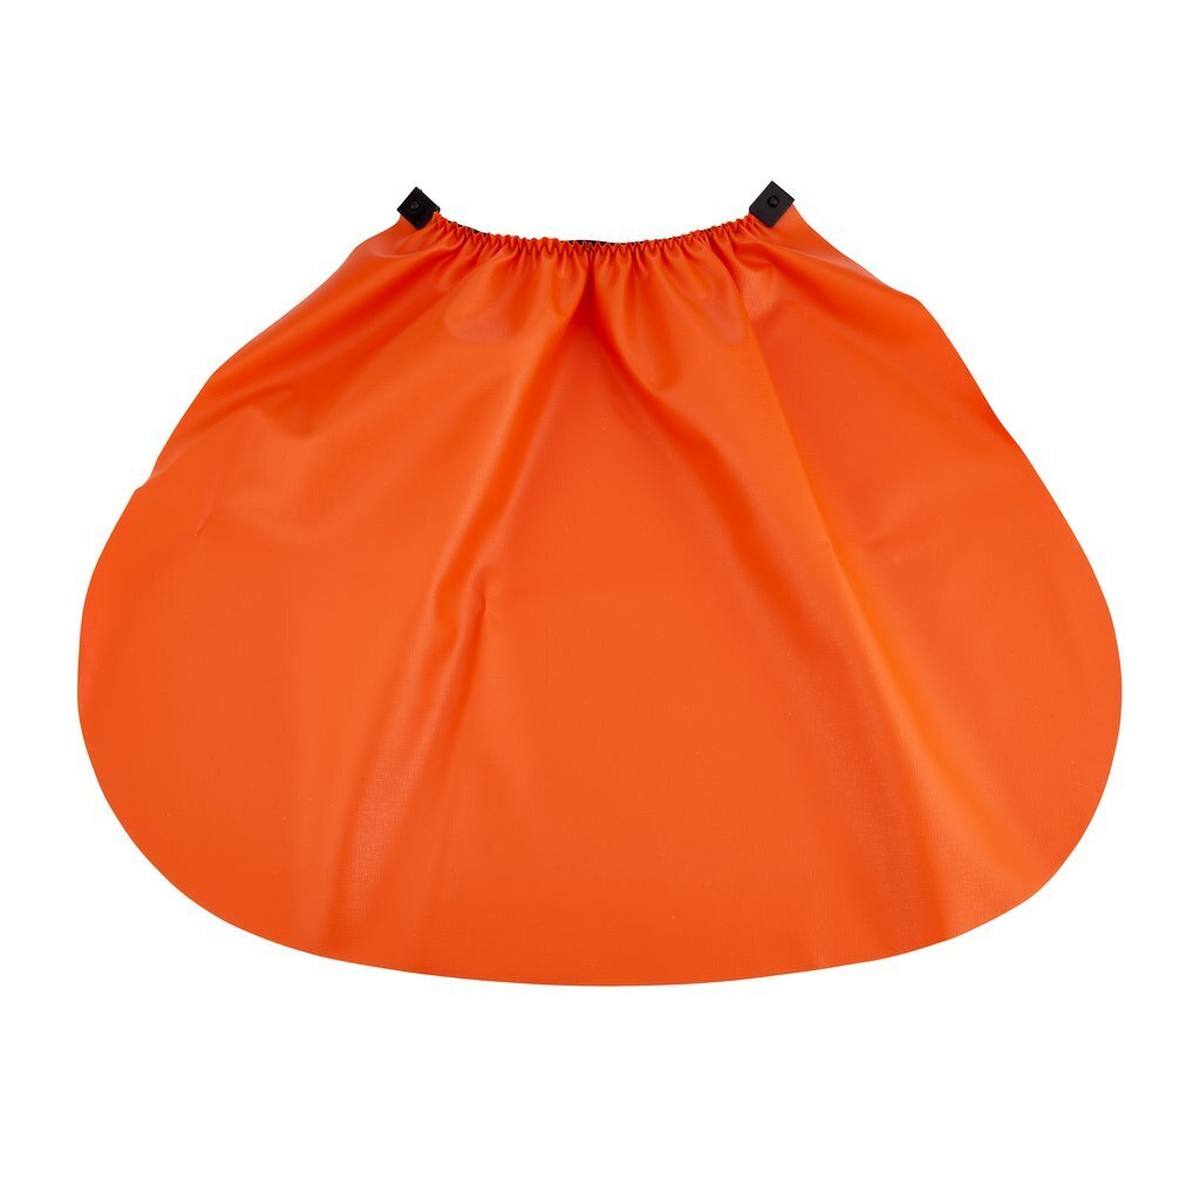 3M Neck protection GR1C in orange, for external attachment to hearing protection